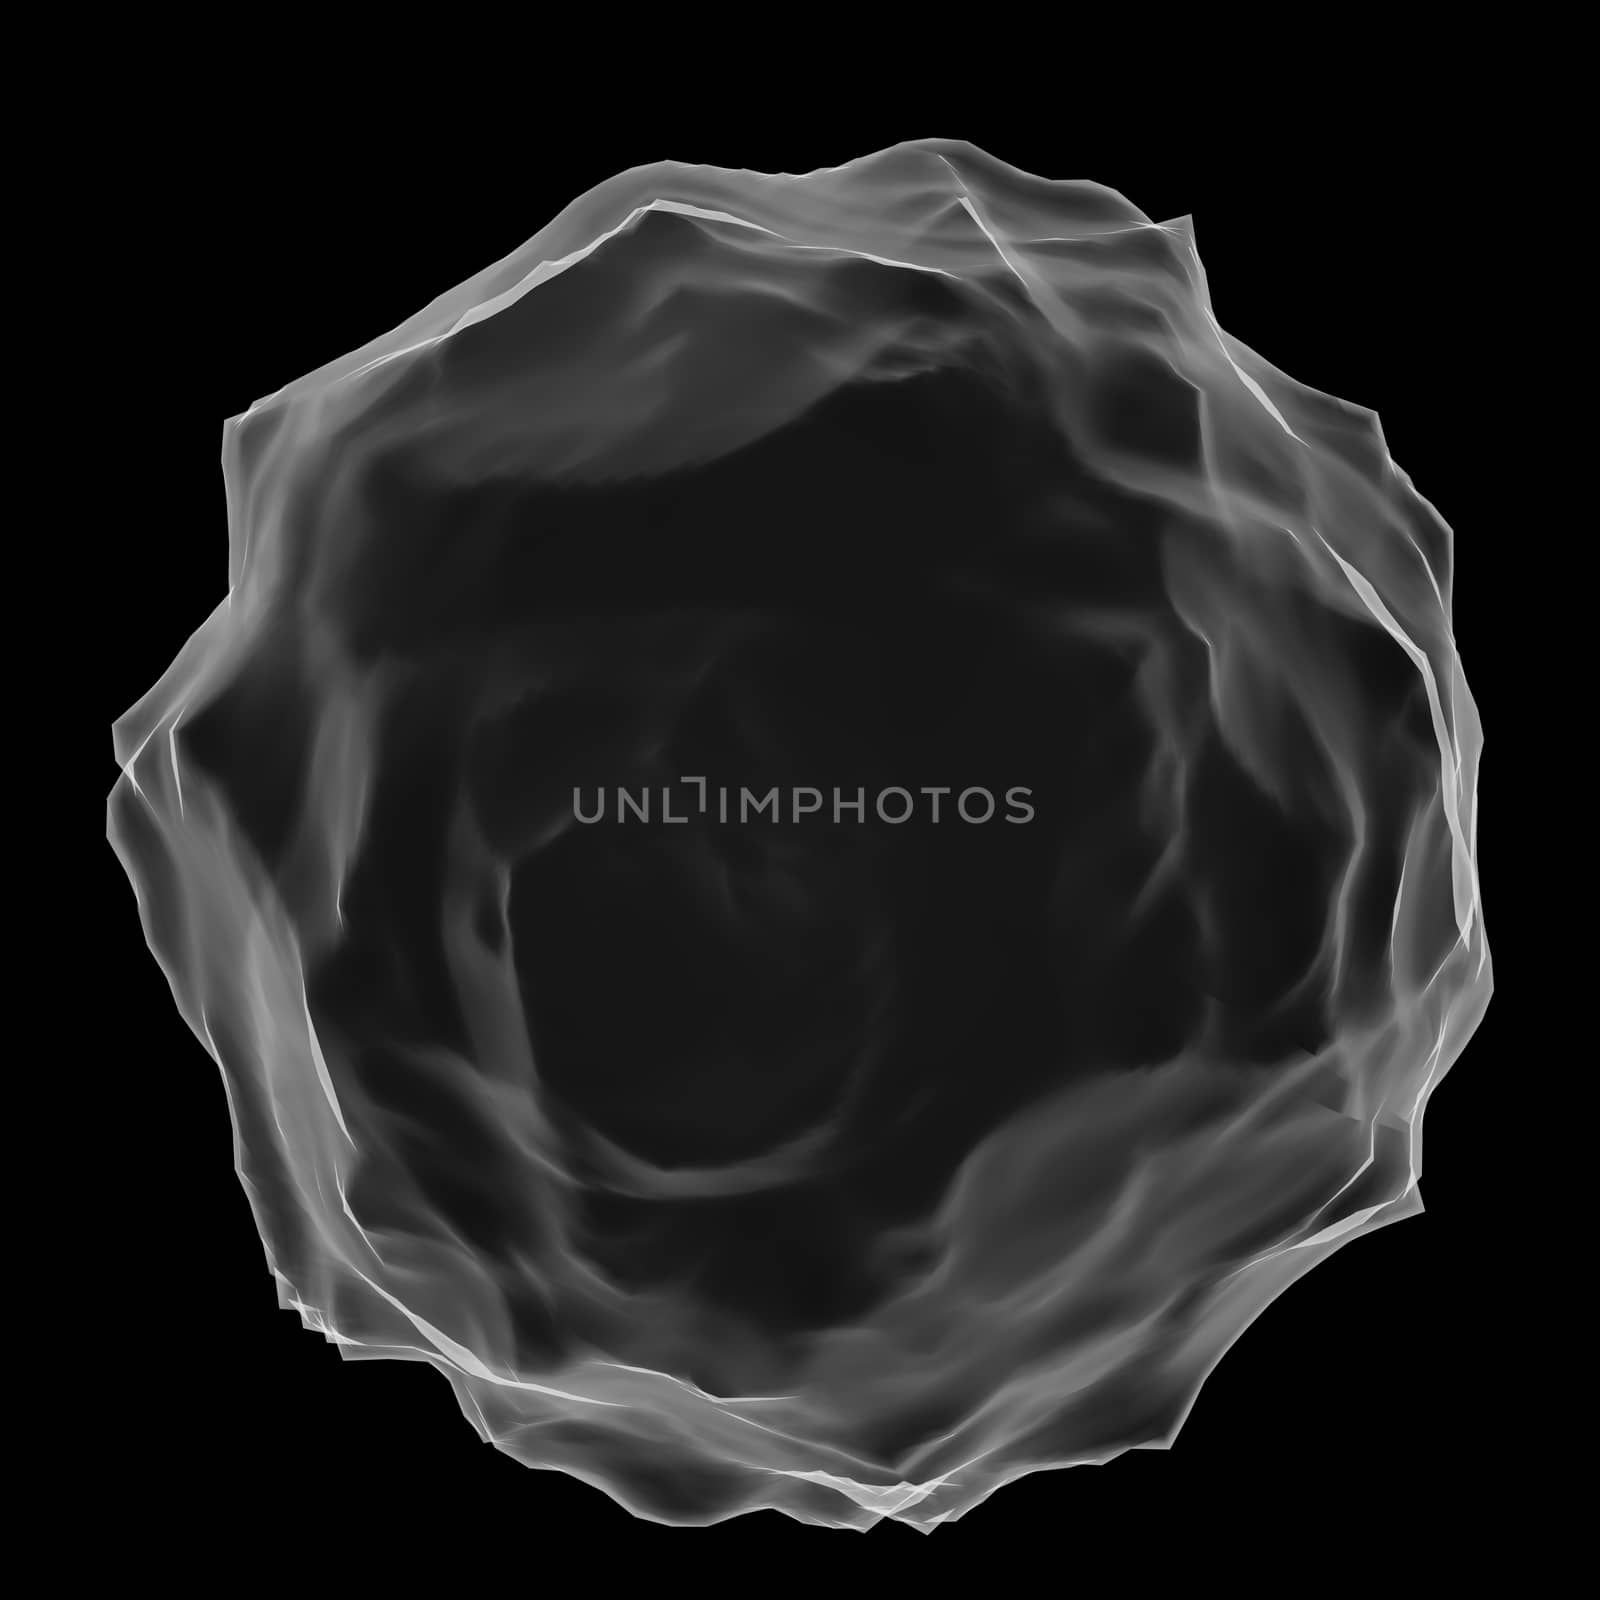 Abstract mesh on dark background. X-ray image of abstract sphere on black background. 3d illustration